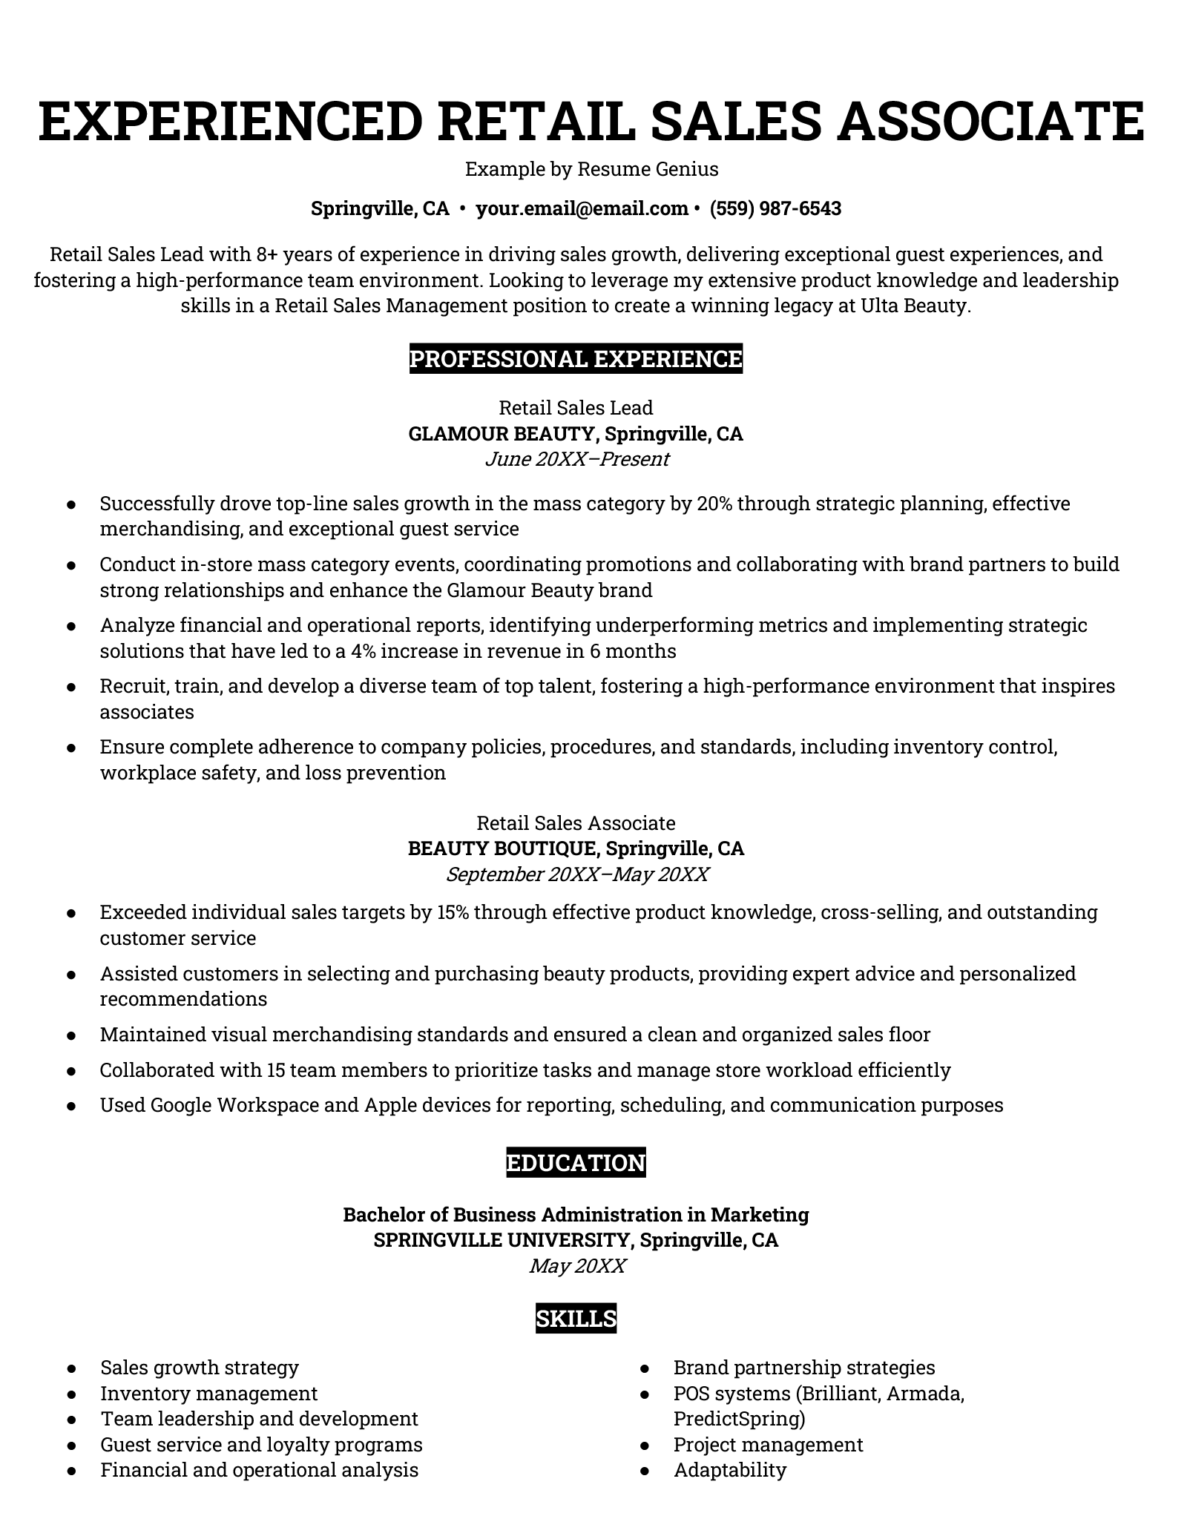 Retail Sales Associate Resume Examples And Writing Guide 8129